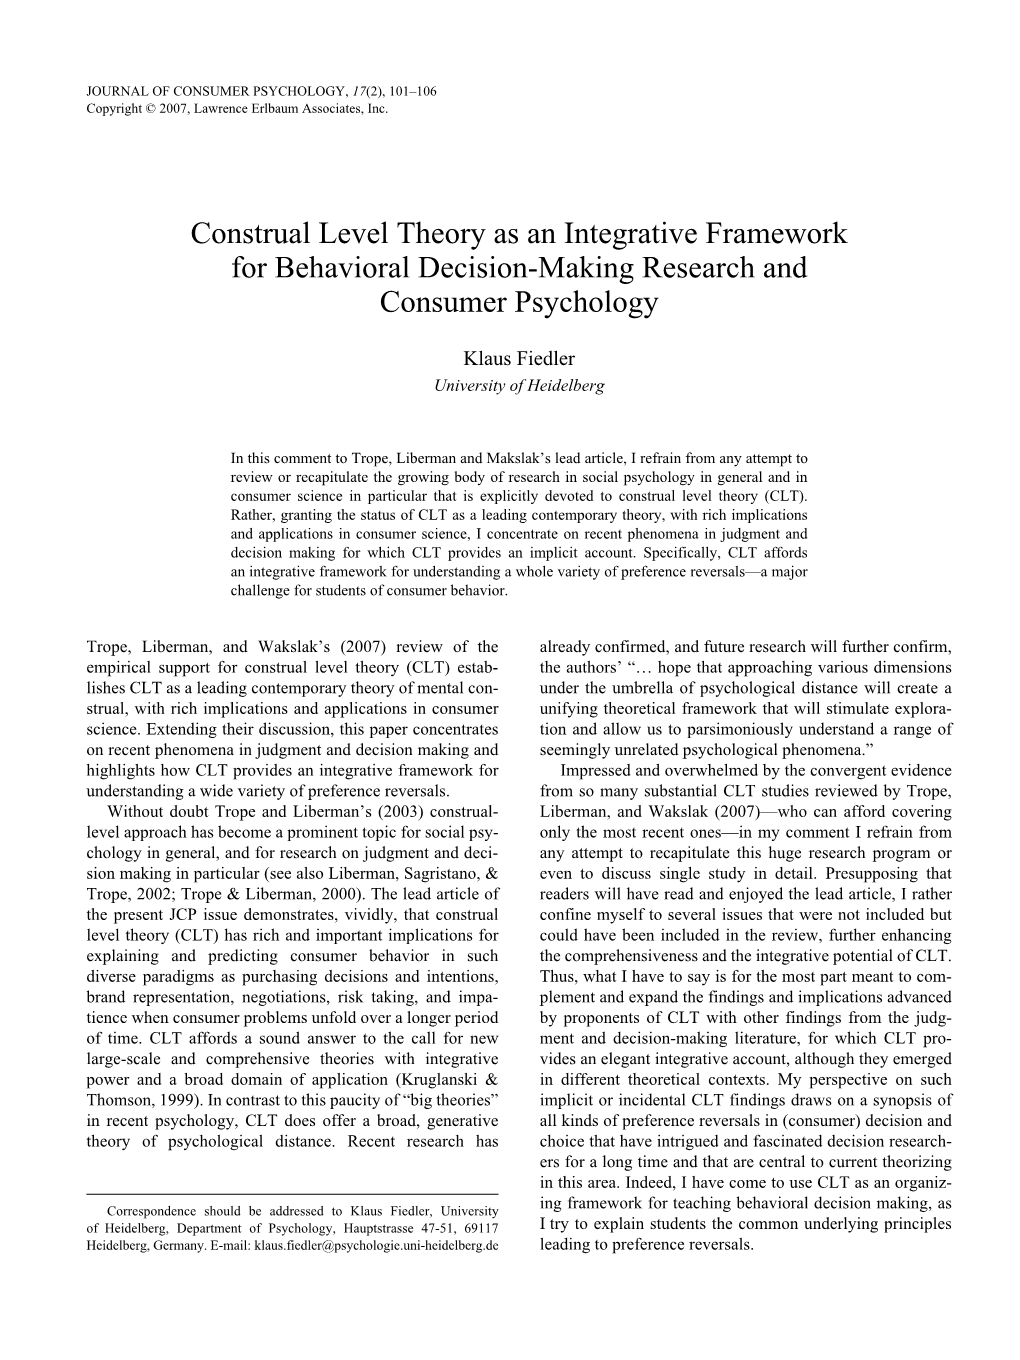 Construal Level Theory As an Integrative Framework for Behavioral Decision-Making Research and Consumer Psychology